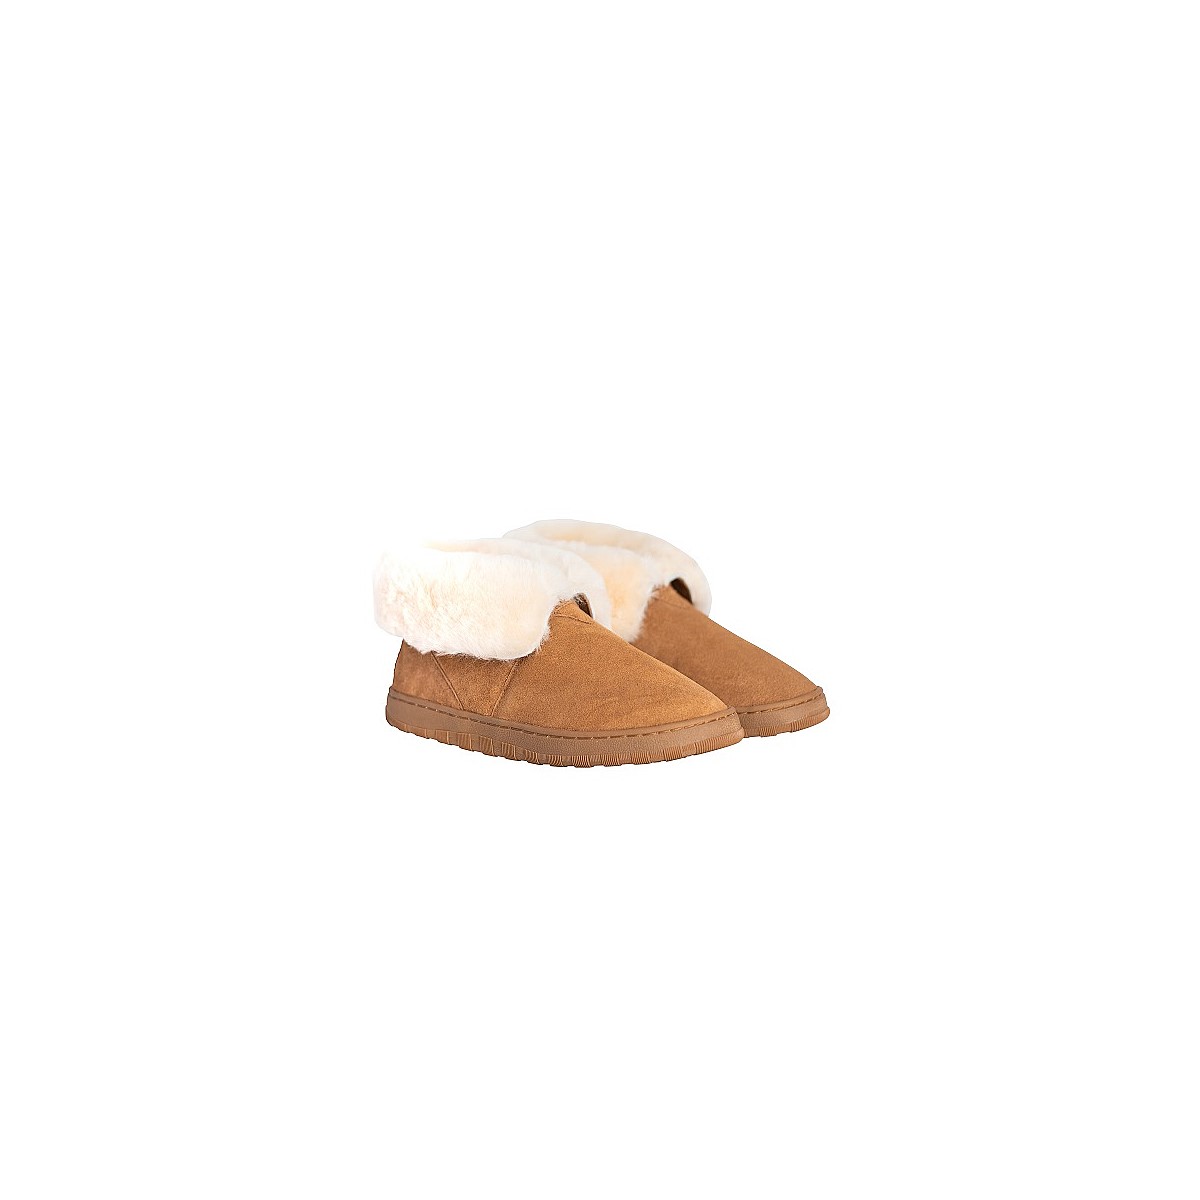 Buy Essentials Slippers Womens Plush Assorted online at countdown.co.nz